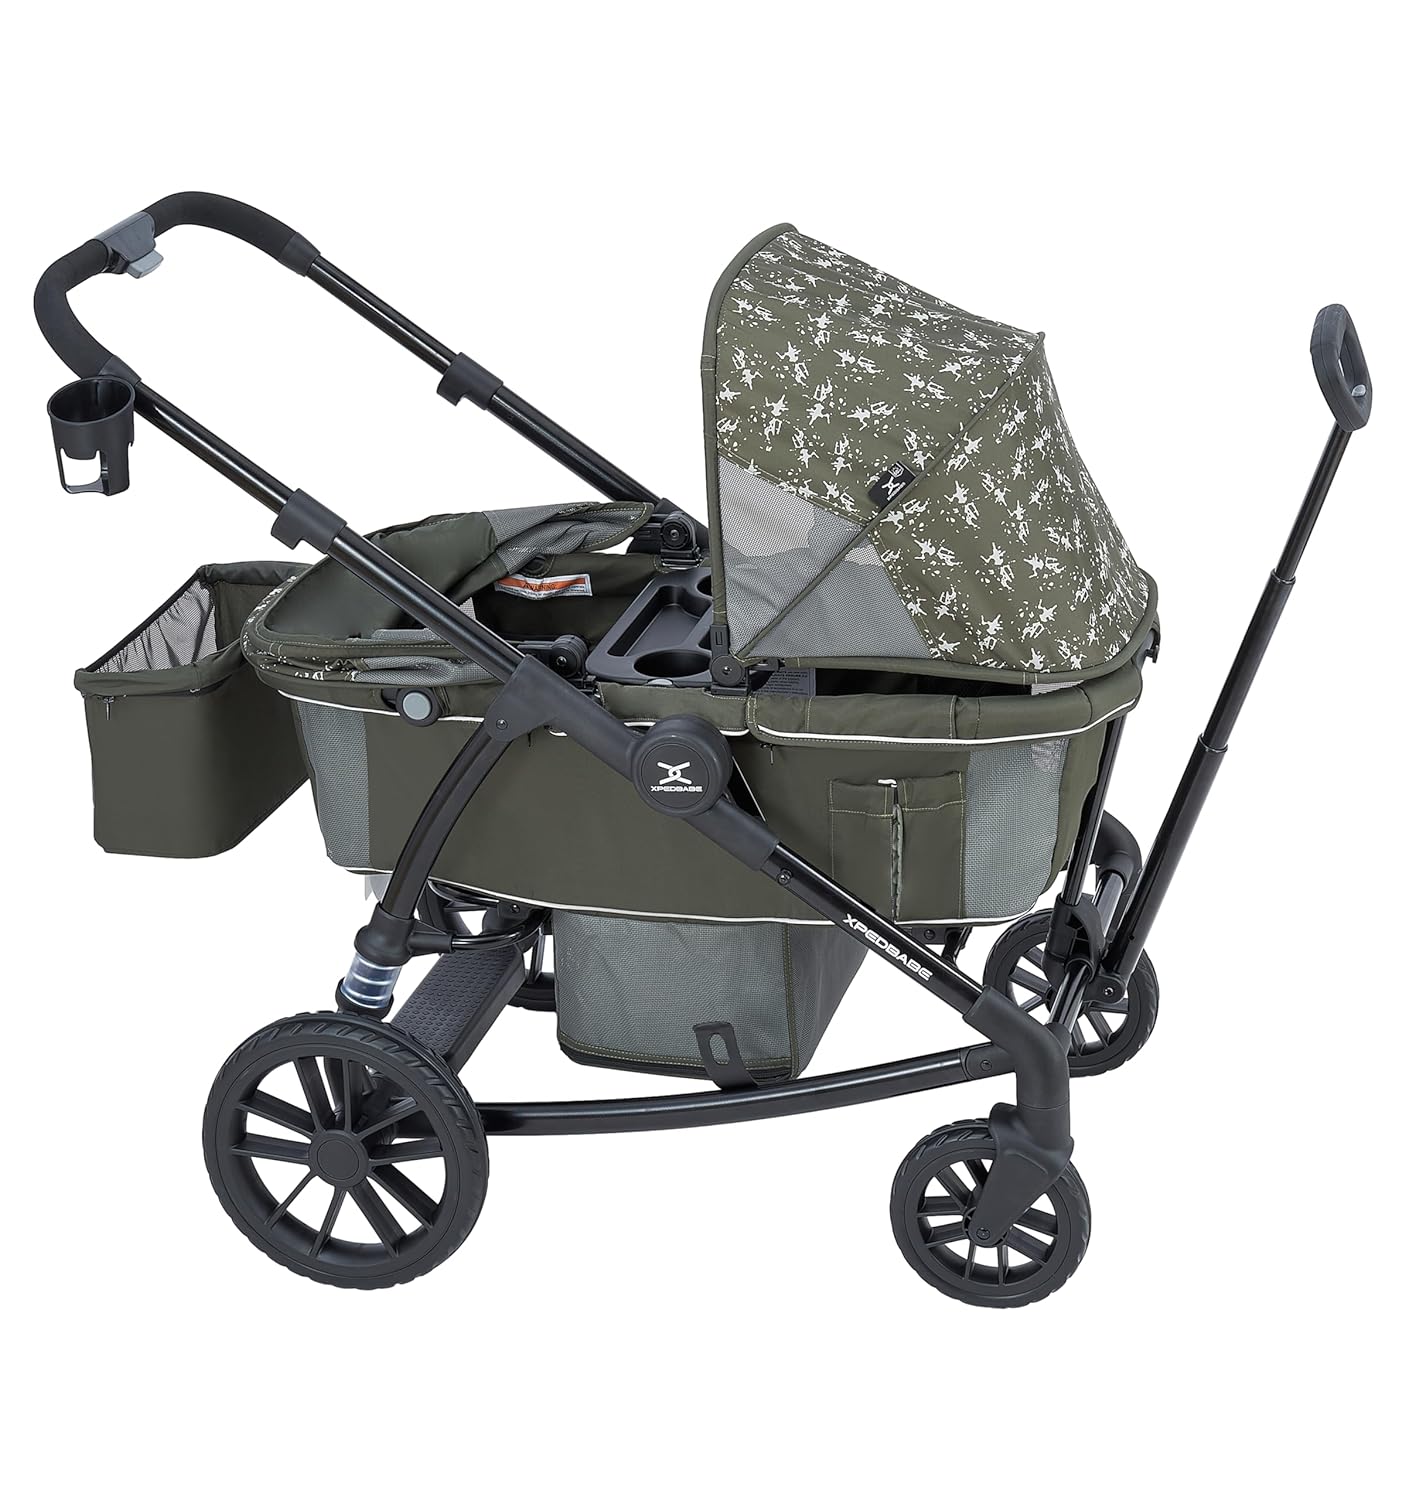 Xped Babe All-Terrain Wagon Stroller for Two Kids, Double Stroller with Push or Pull Handle, Canopy, Storage Basket, Dinner Plate, Oversized Damping Wheels, Mosquito Net and Rain Cover（Green） - Xped Babe All-Terrain Wagon Stroller Review